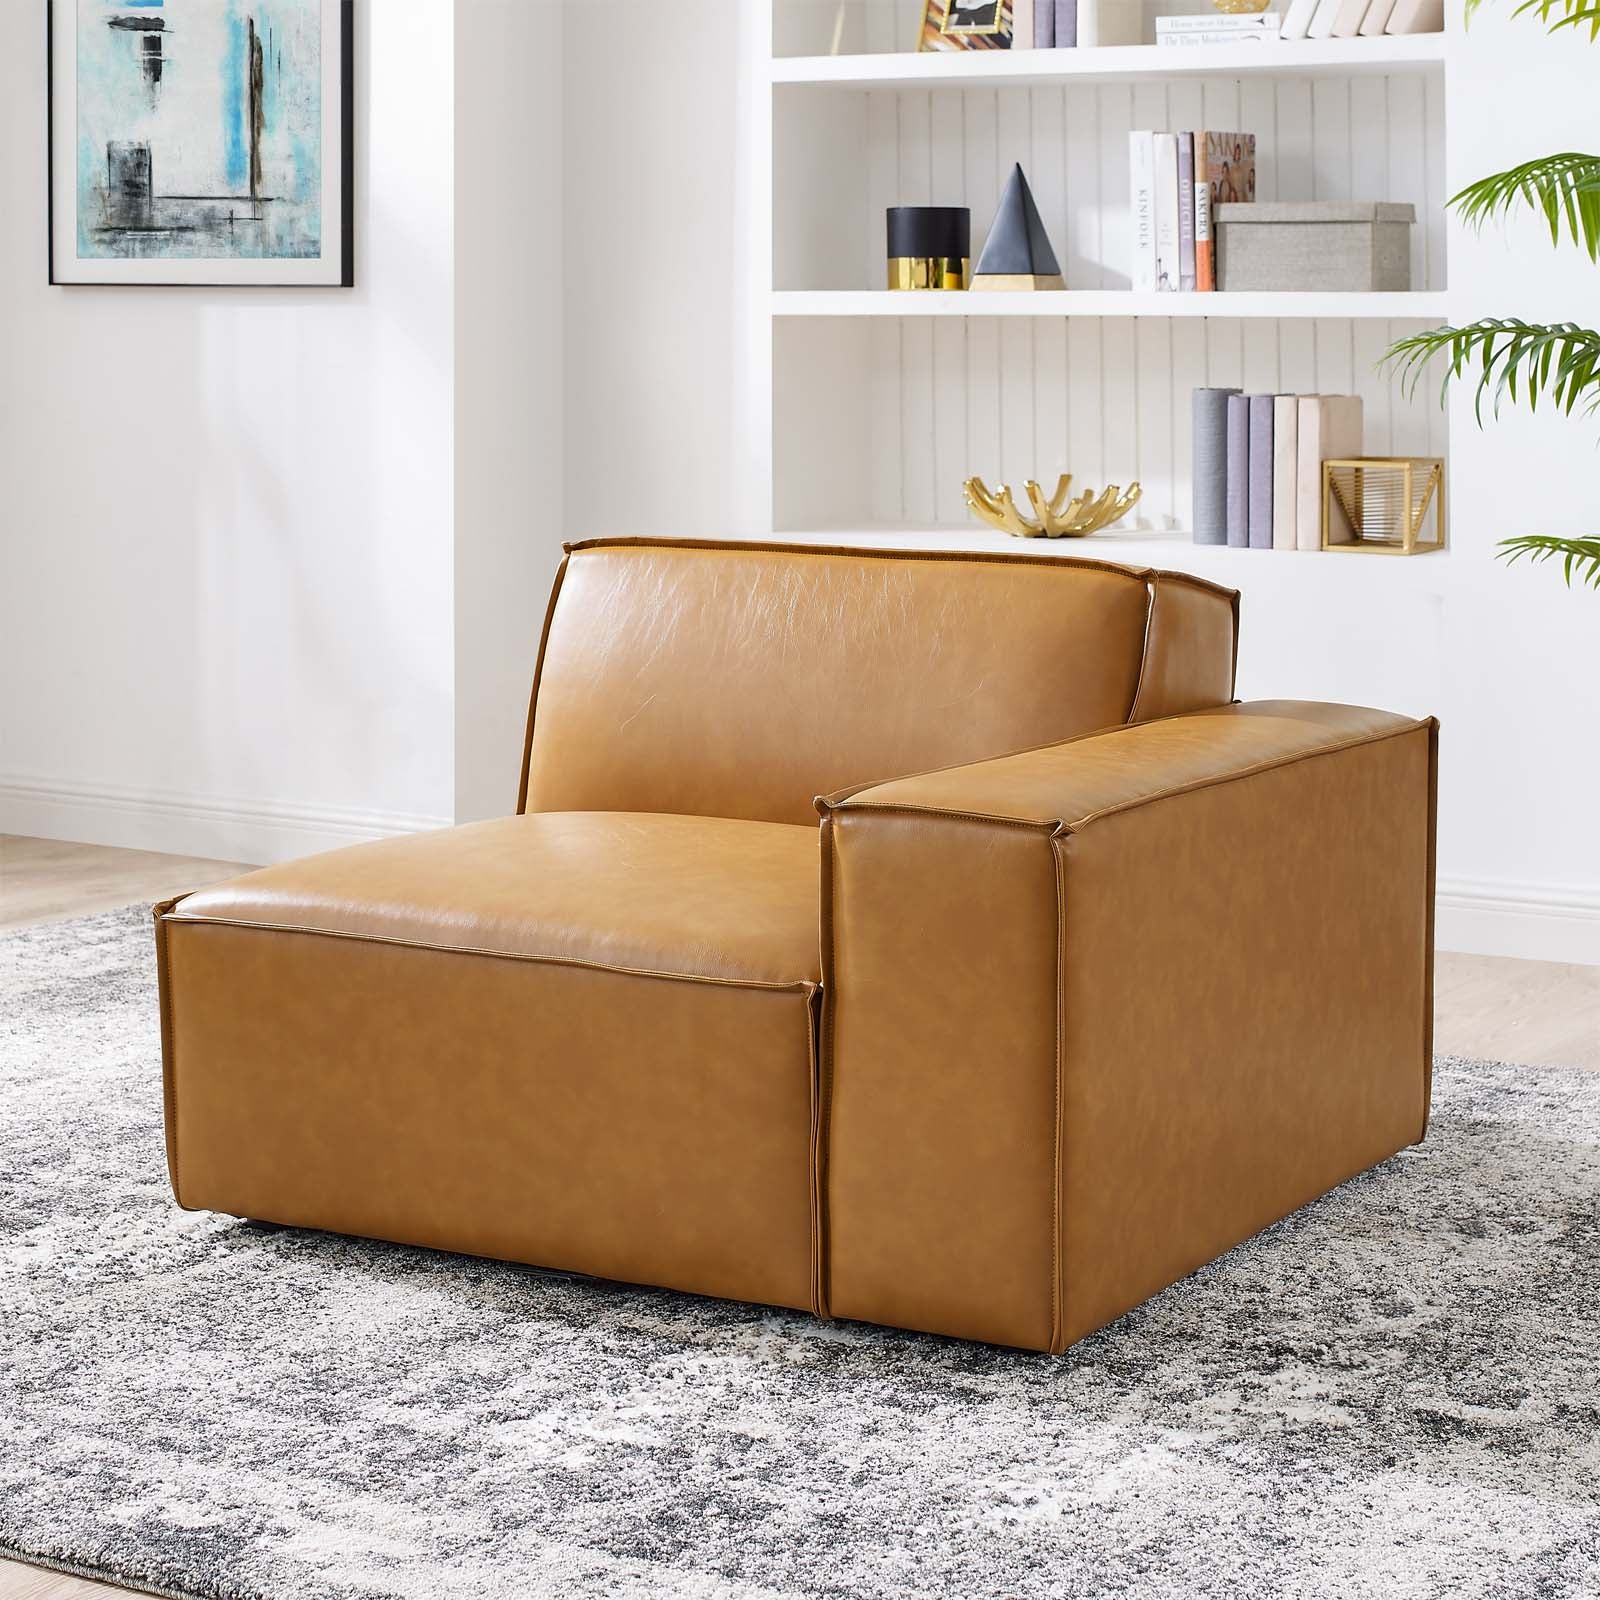 Restore Left-Arm Vegan Leather Sectional Sofa Chair - East Shore Modern Home Furnishings